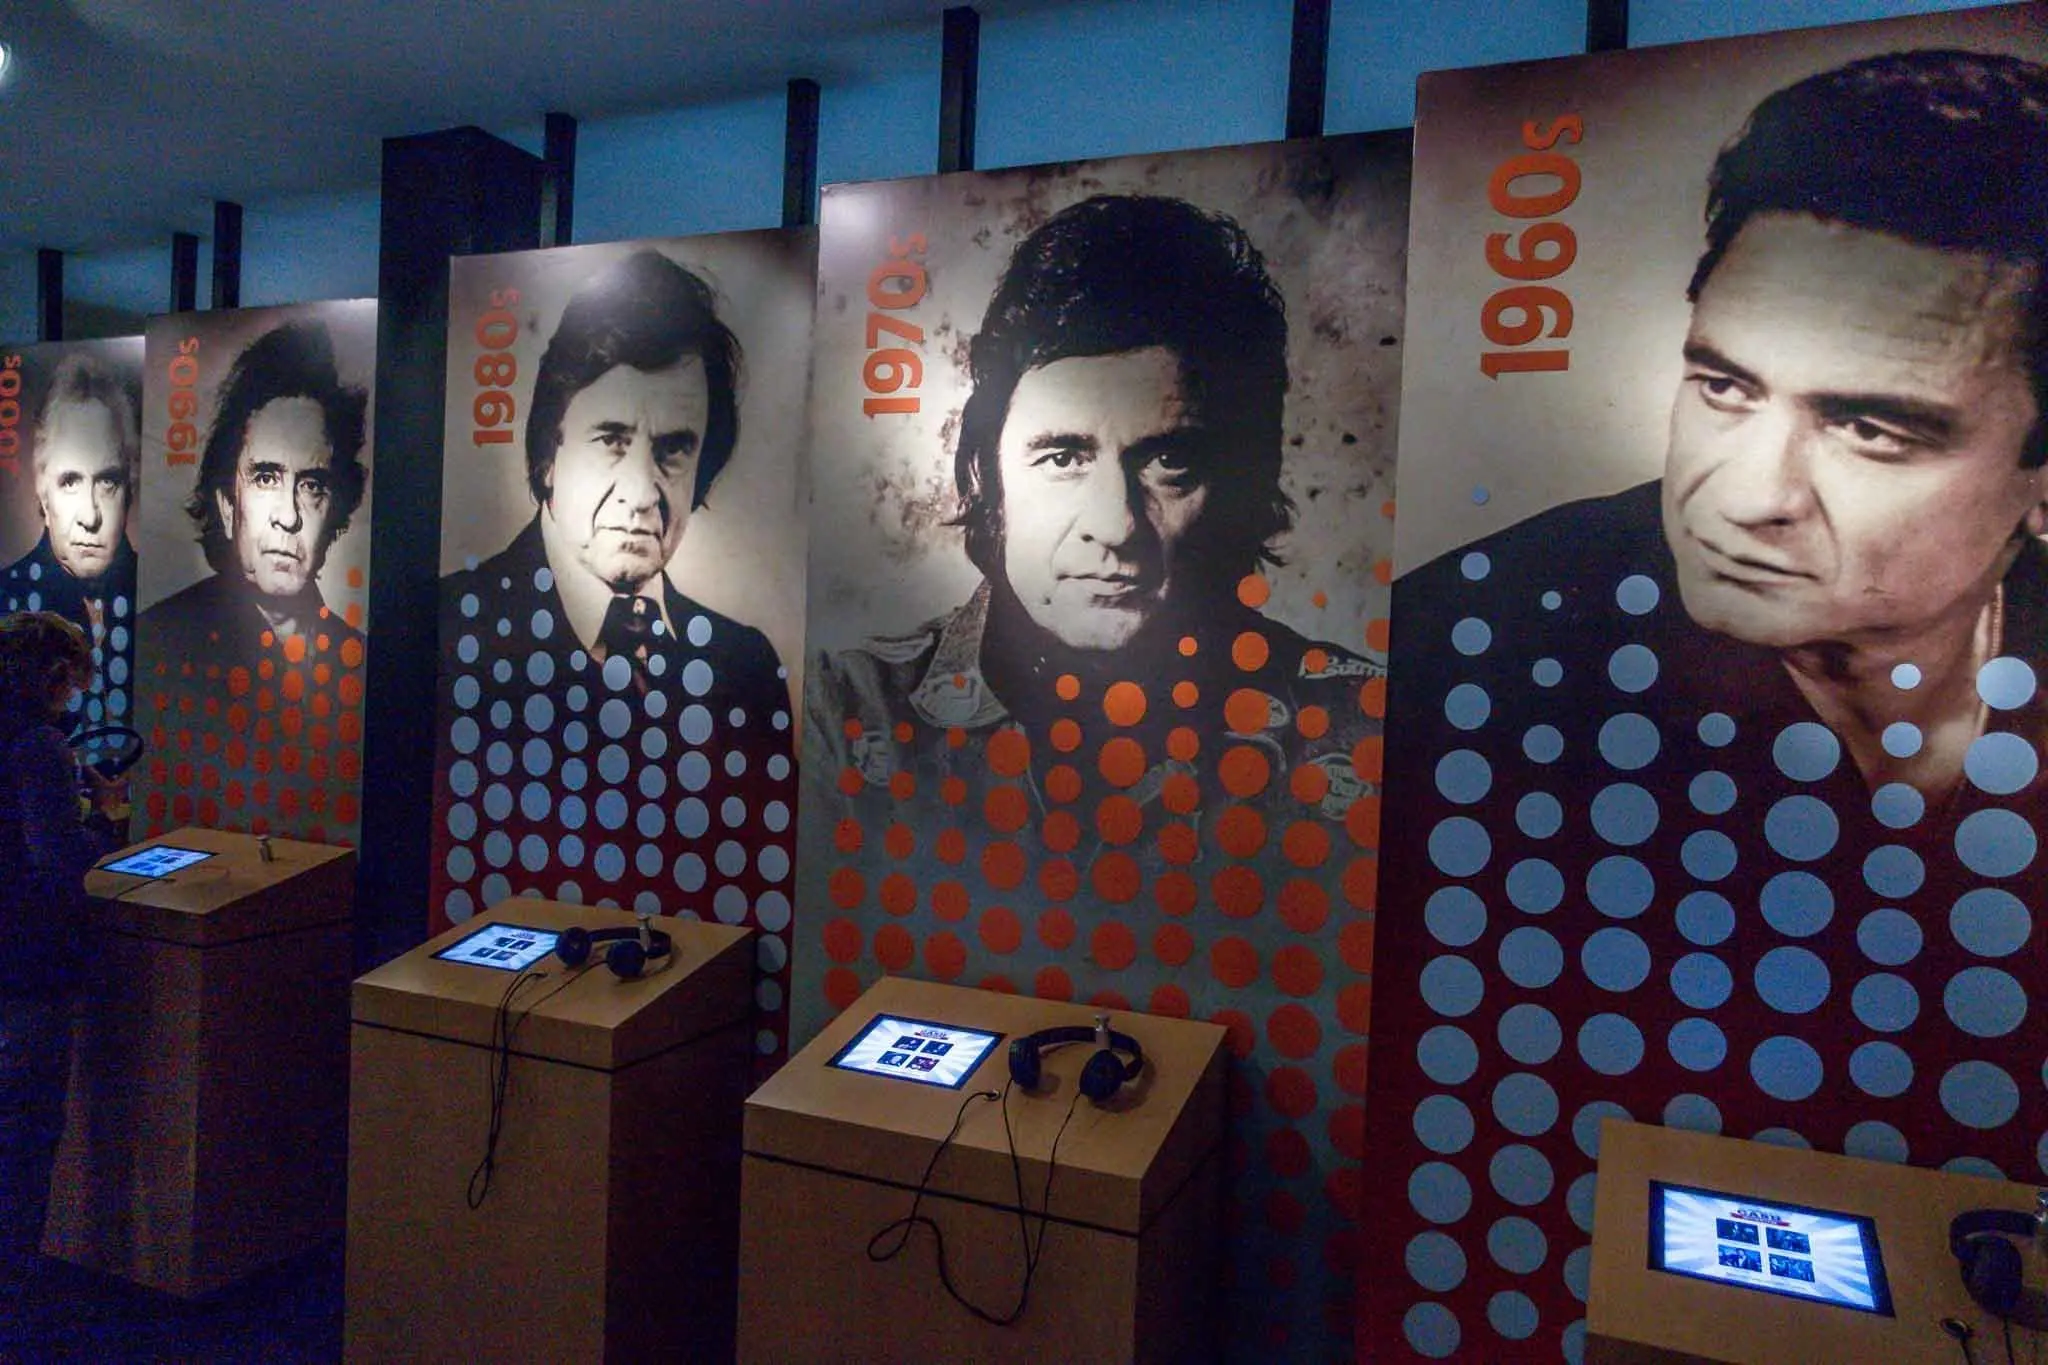 Interactive museum exhibits with photos of Johnny Cash.